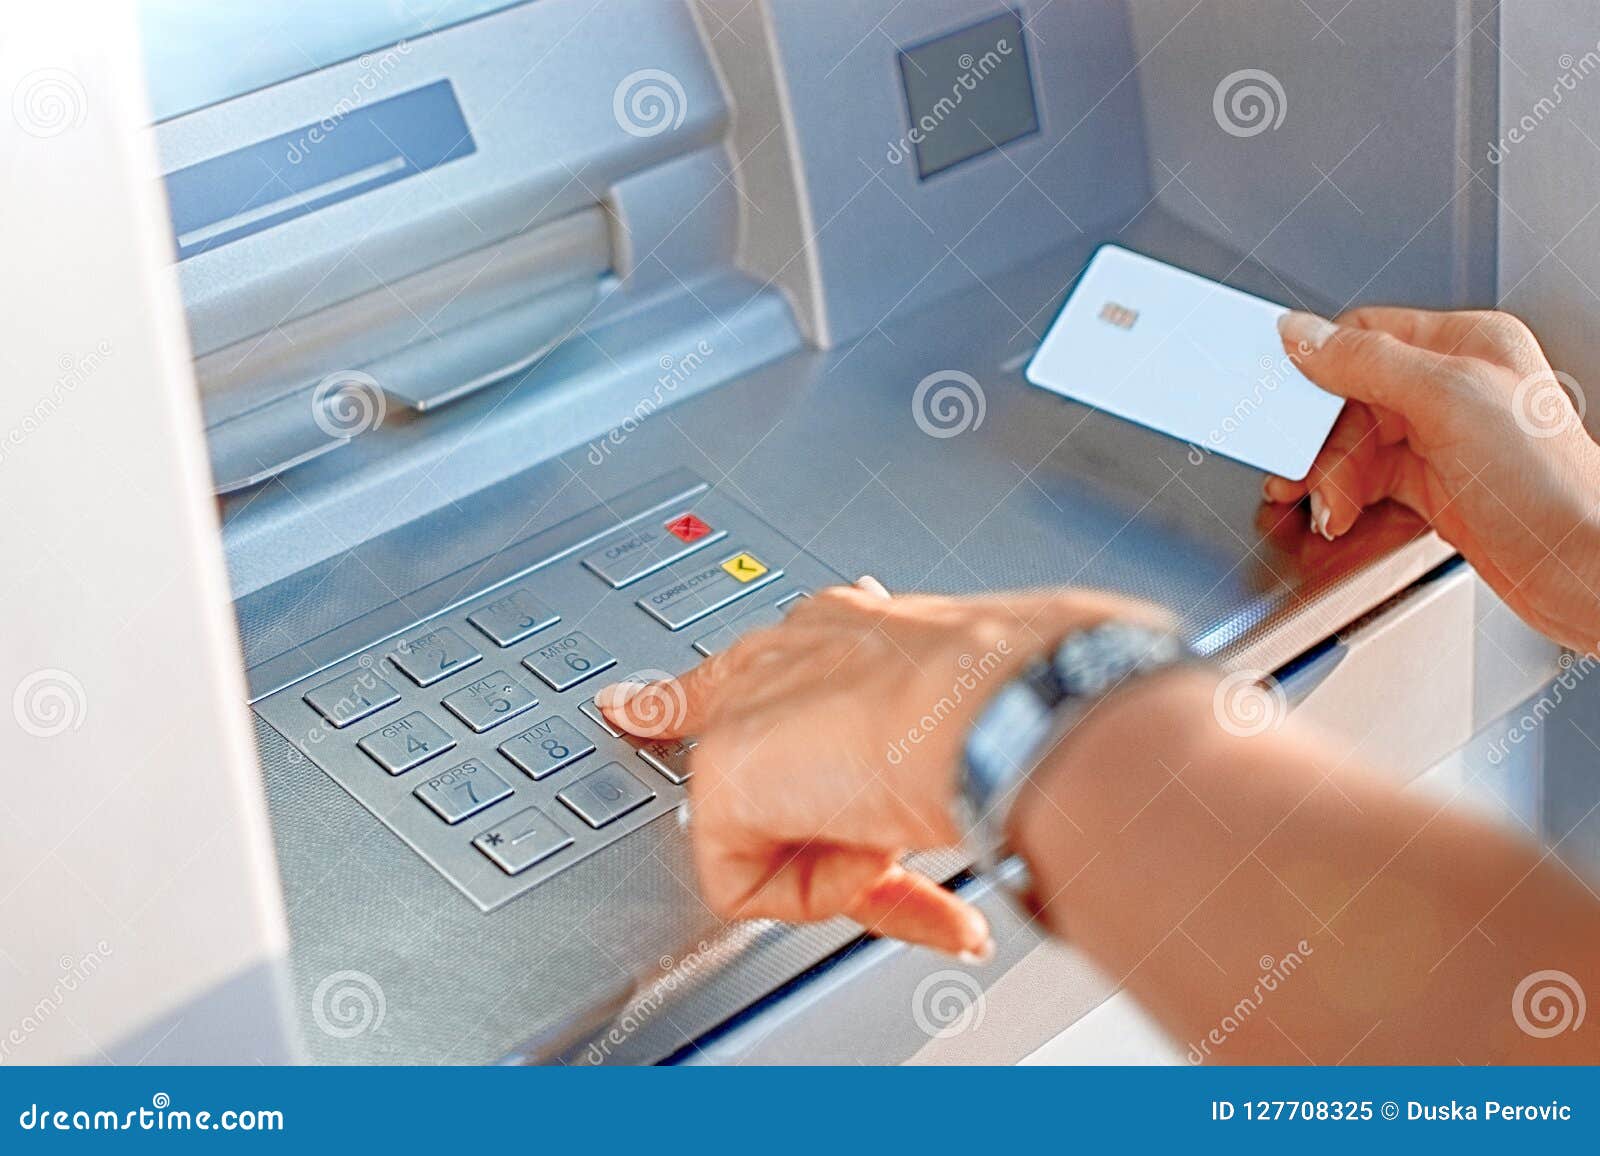 hand of a woman with a credit card, using an atm. woman using an atm machine with her credit card.